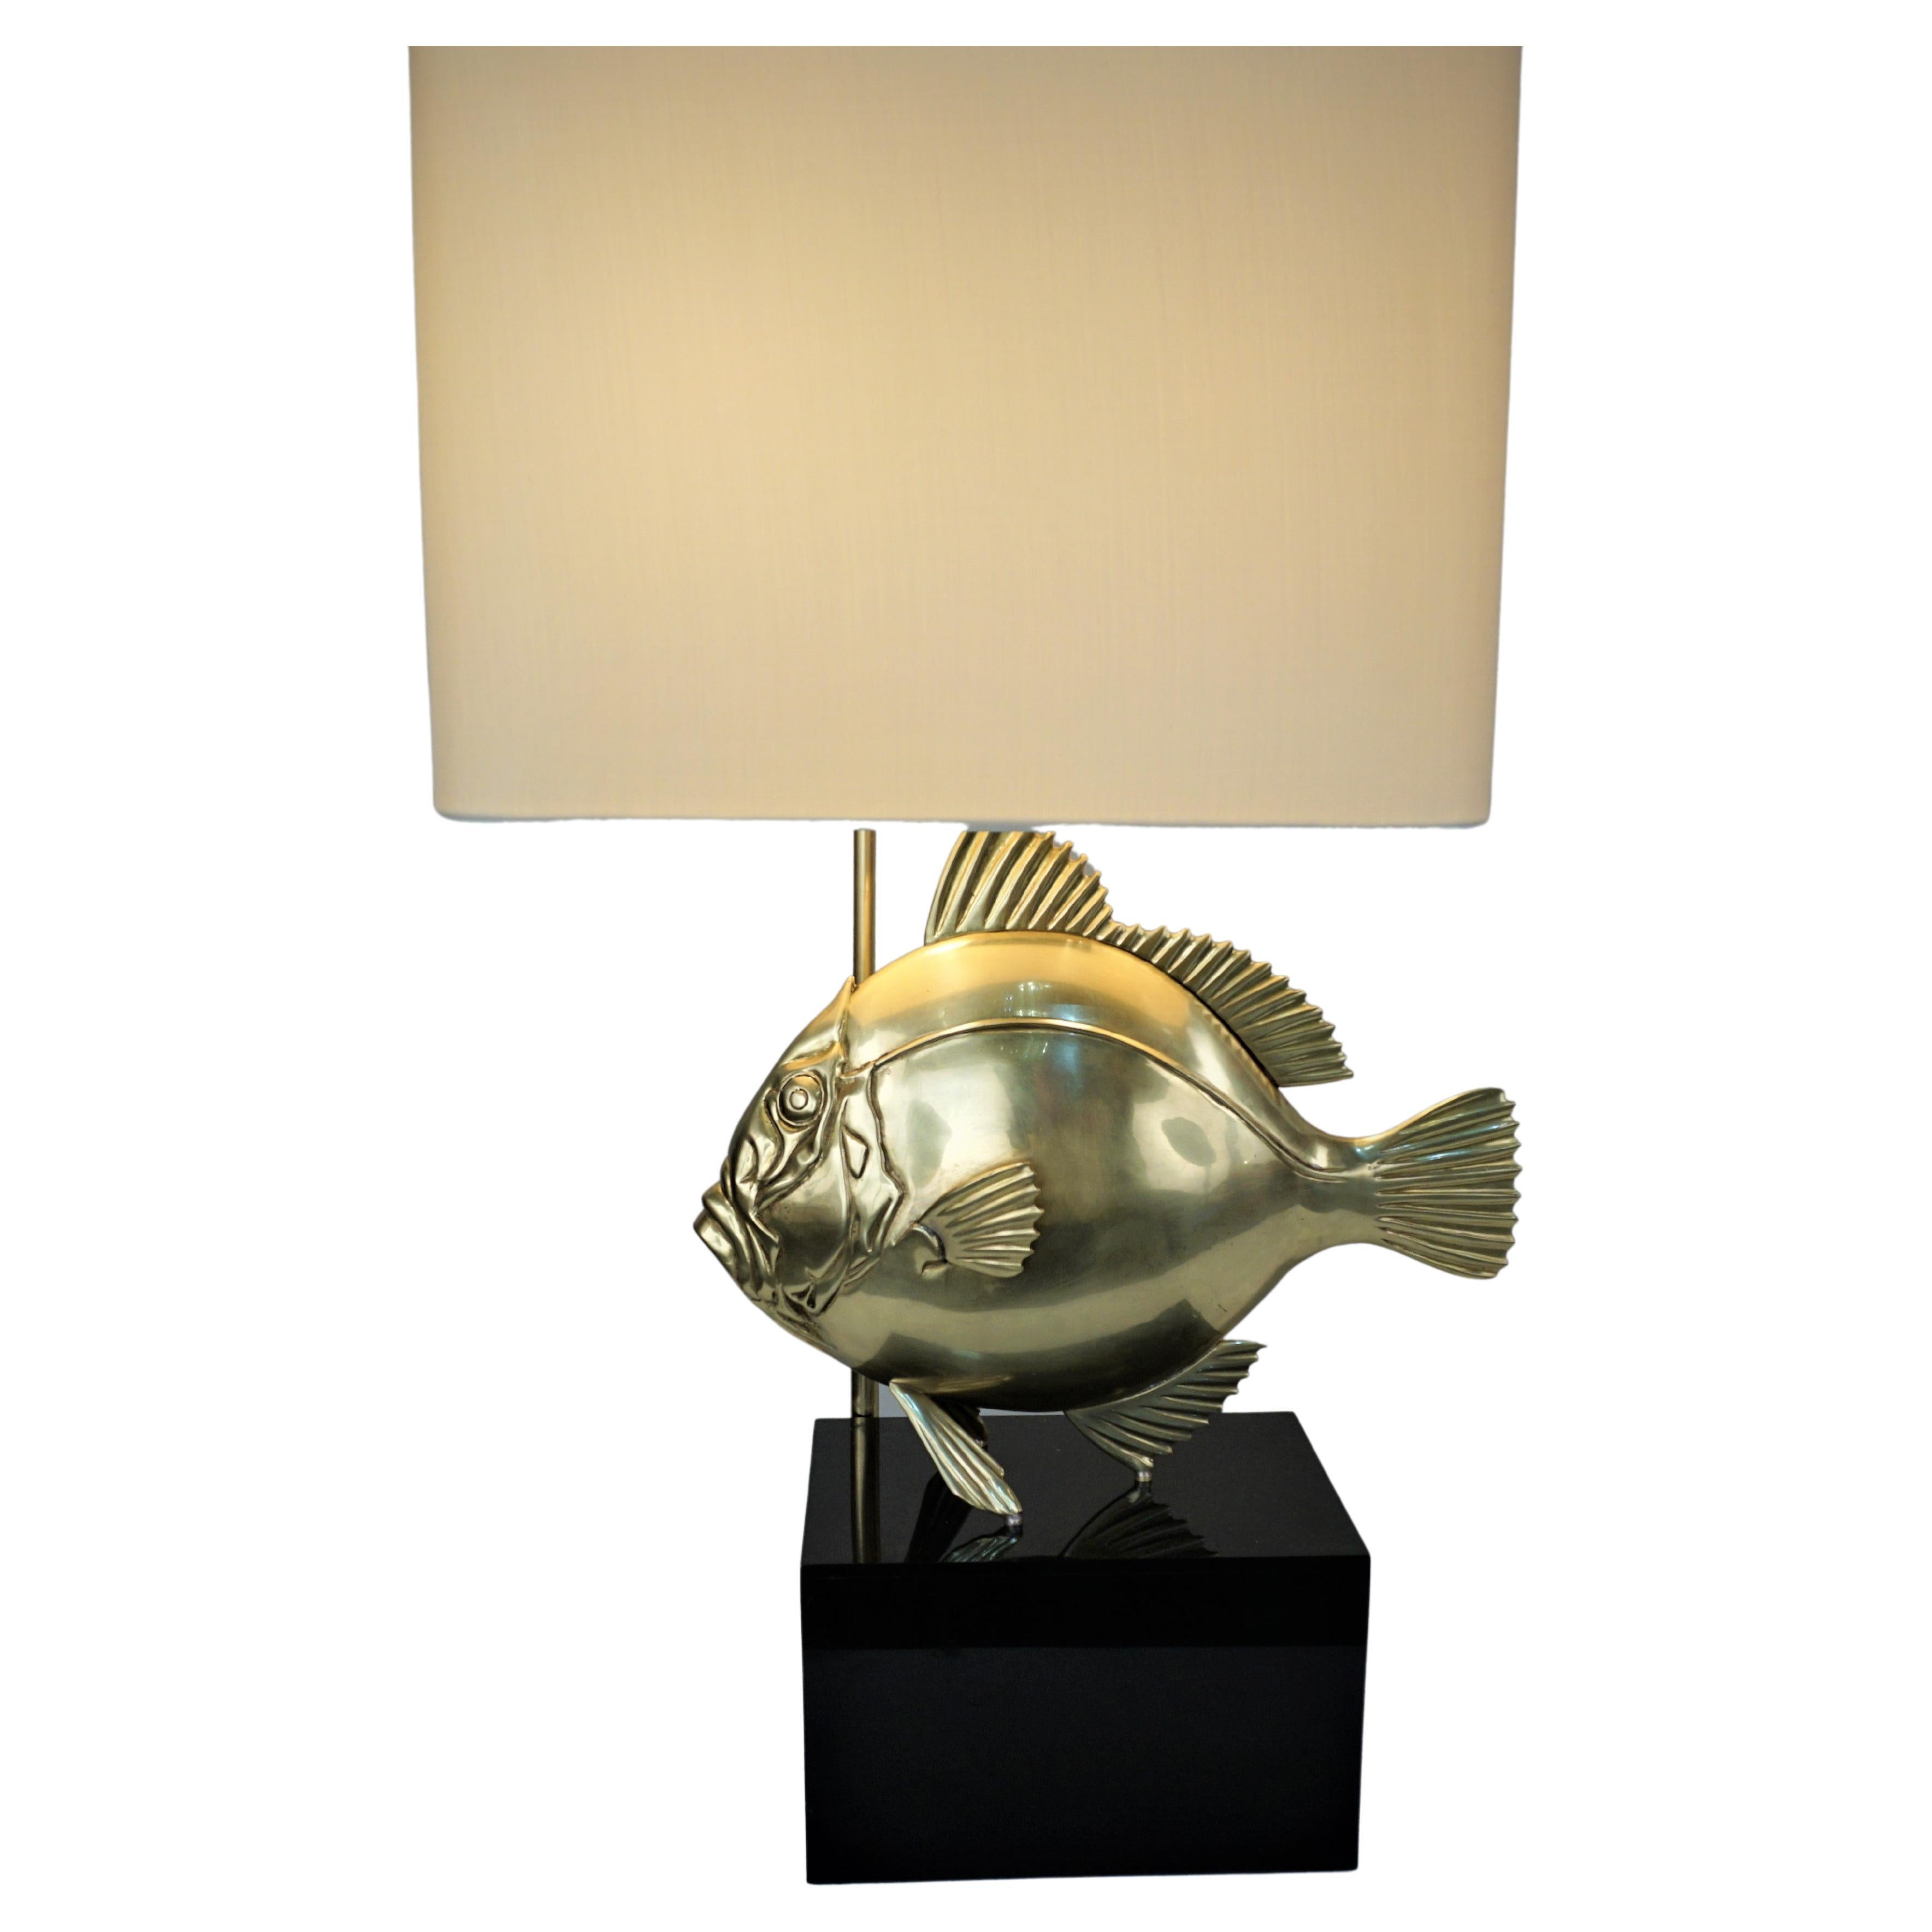 Bronze Fish Lamp by Pargos